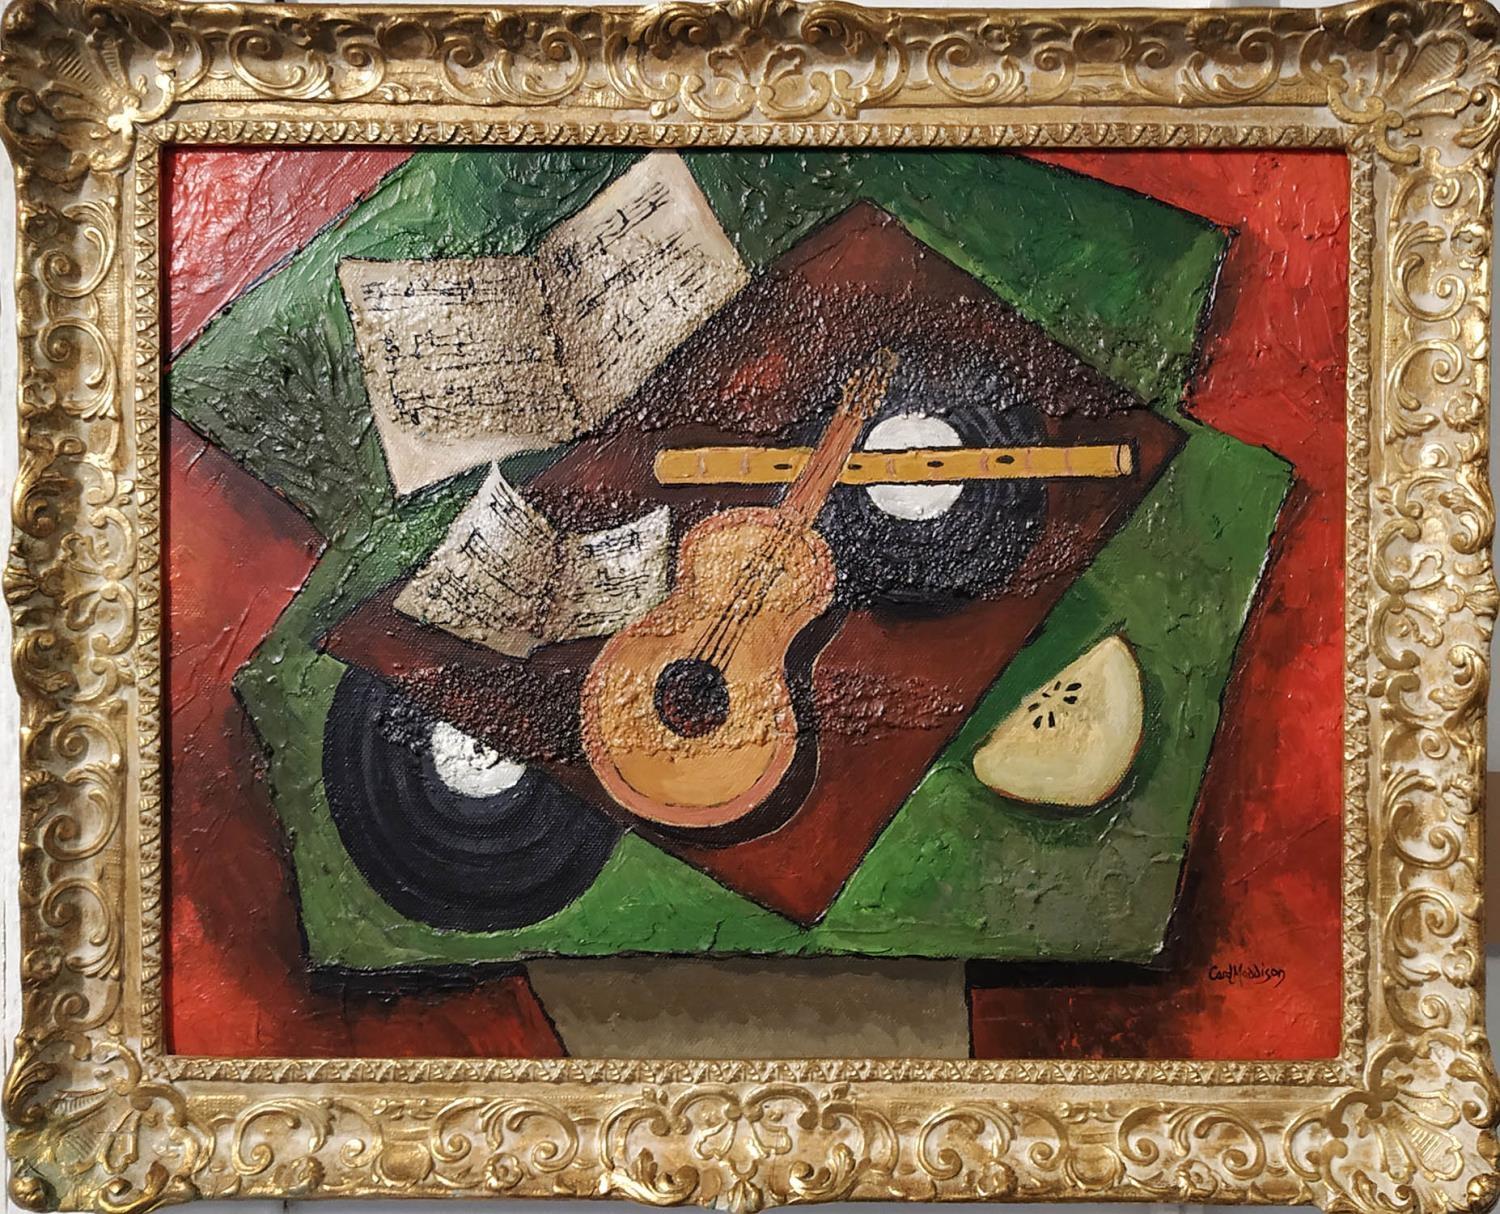 CAROL MADISON, 'Still Life with Guitar and Melon', oil on board, 34cm x 44cm, signed and framed.